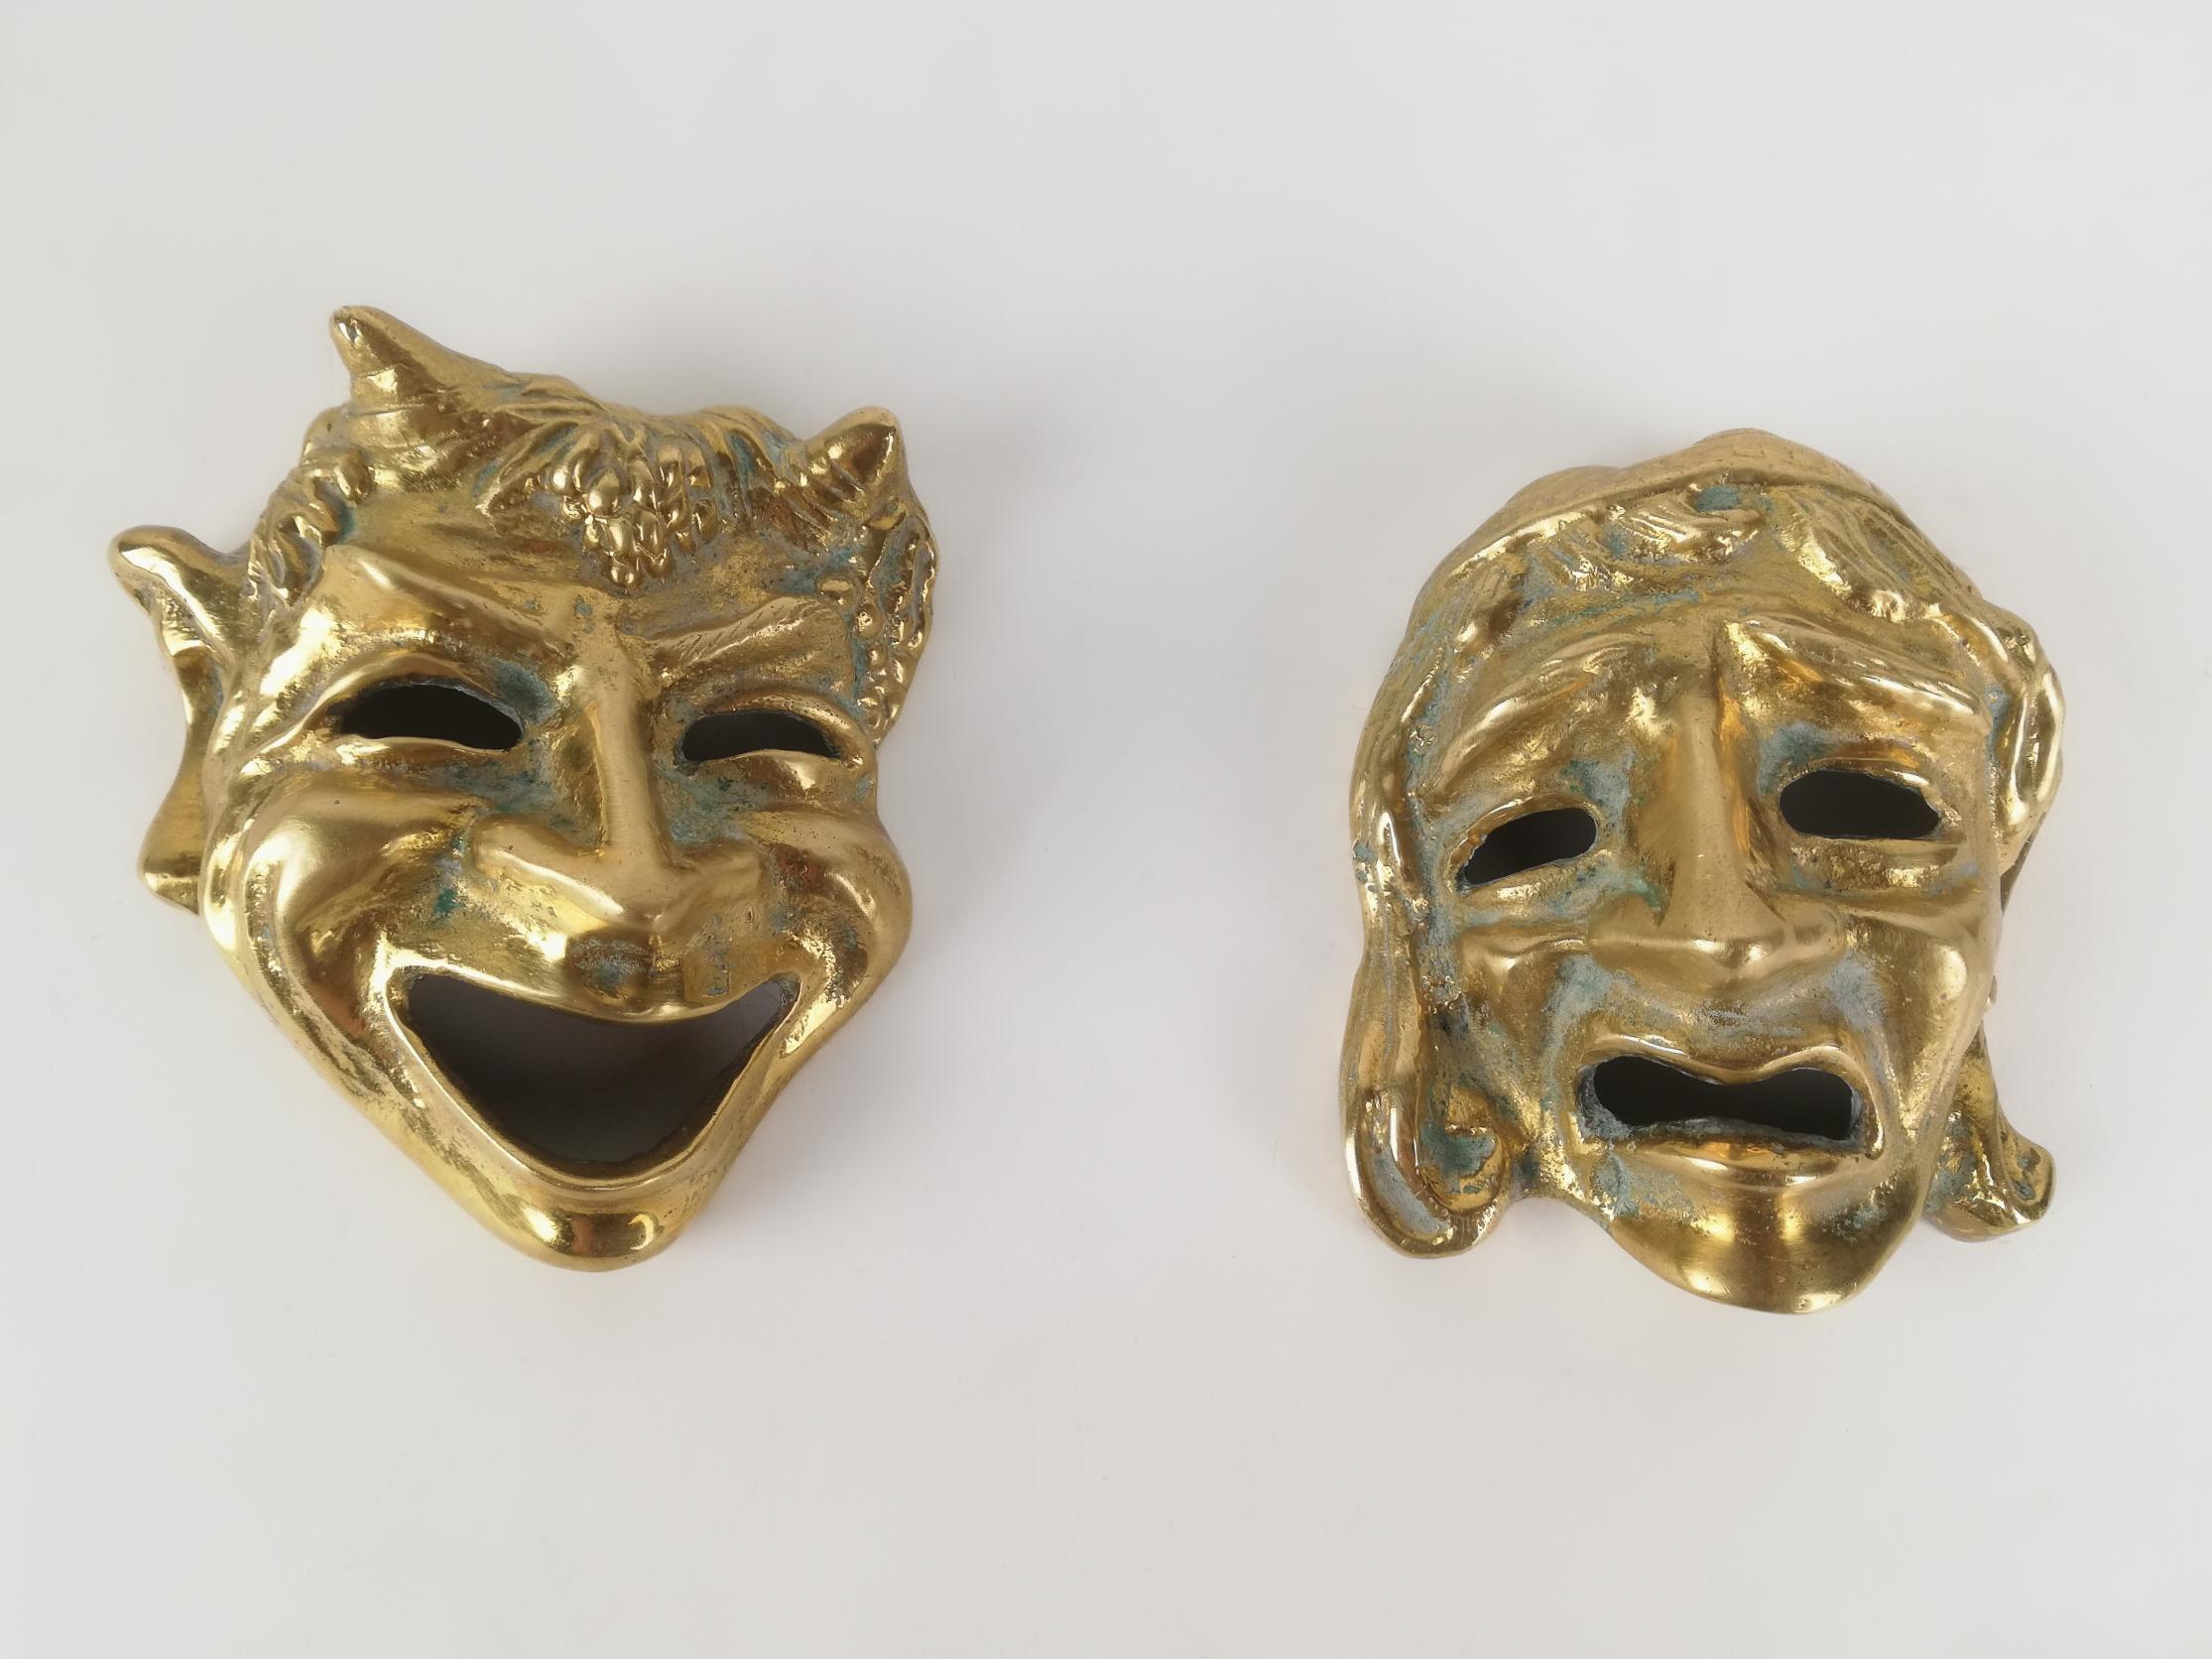 Midcentury Handcrafted Mask Depicting the Comedy and Tragedy of Greek Theatre For Sale 2